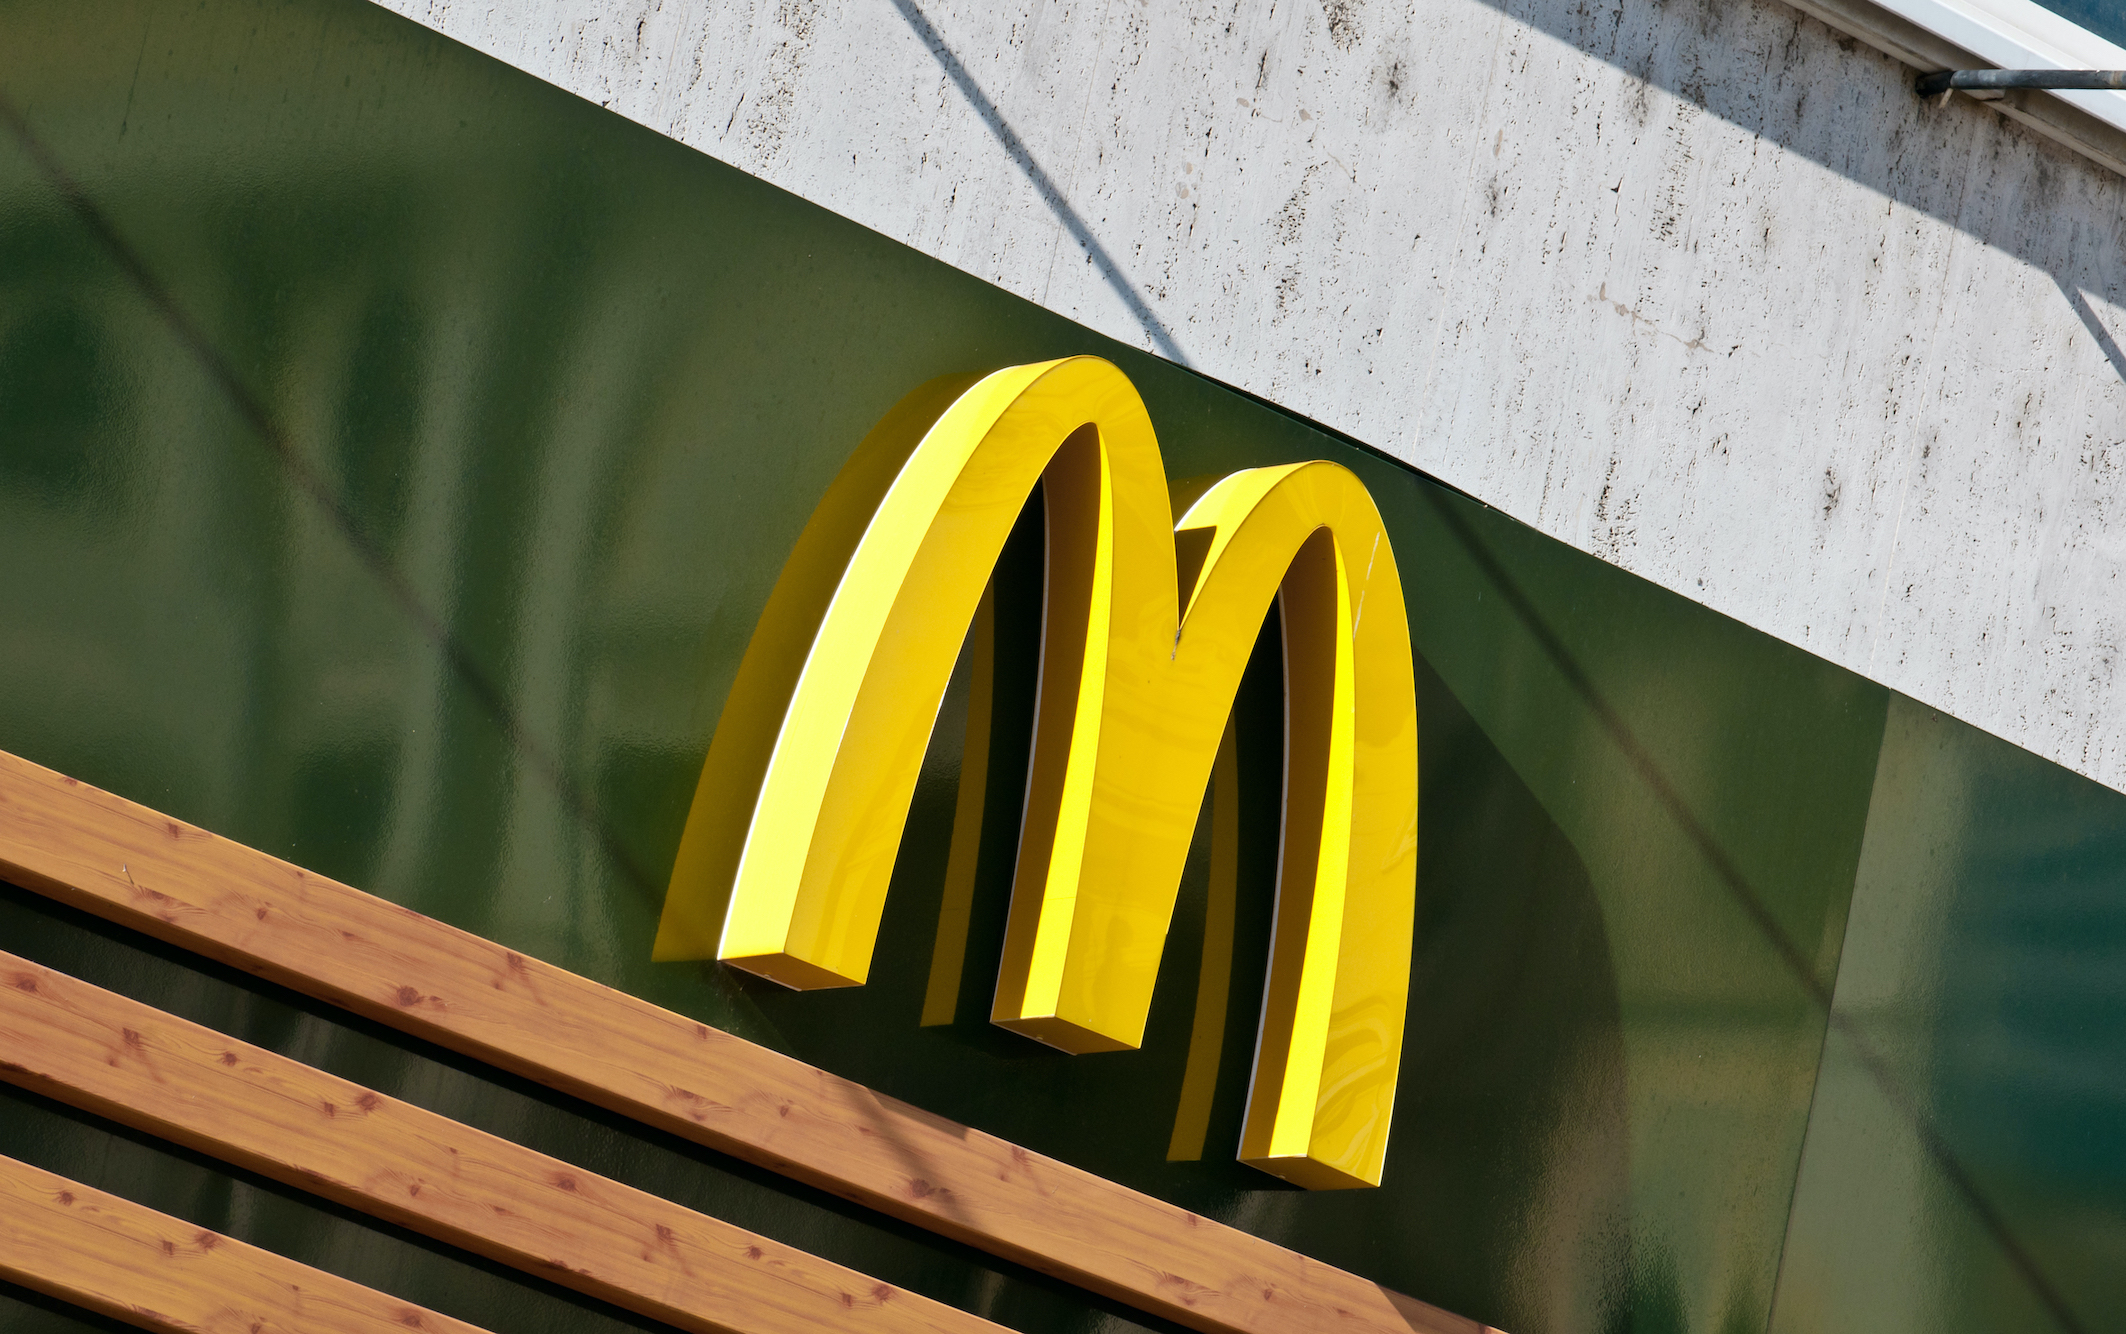 How McDonalds lost its Big Mac Trade Mark in Europe